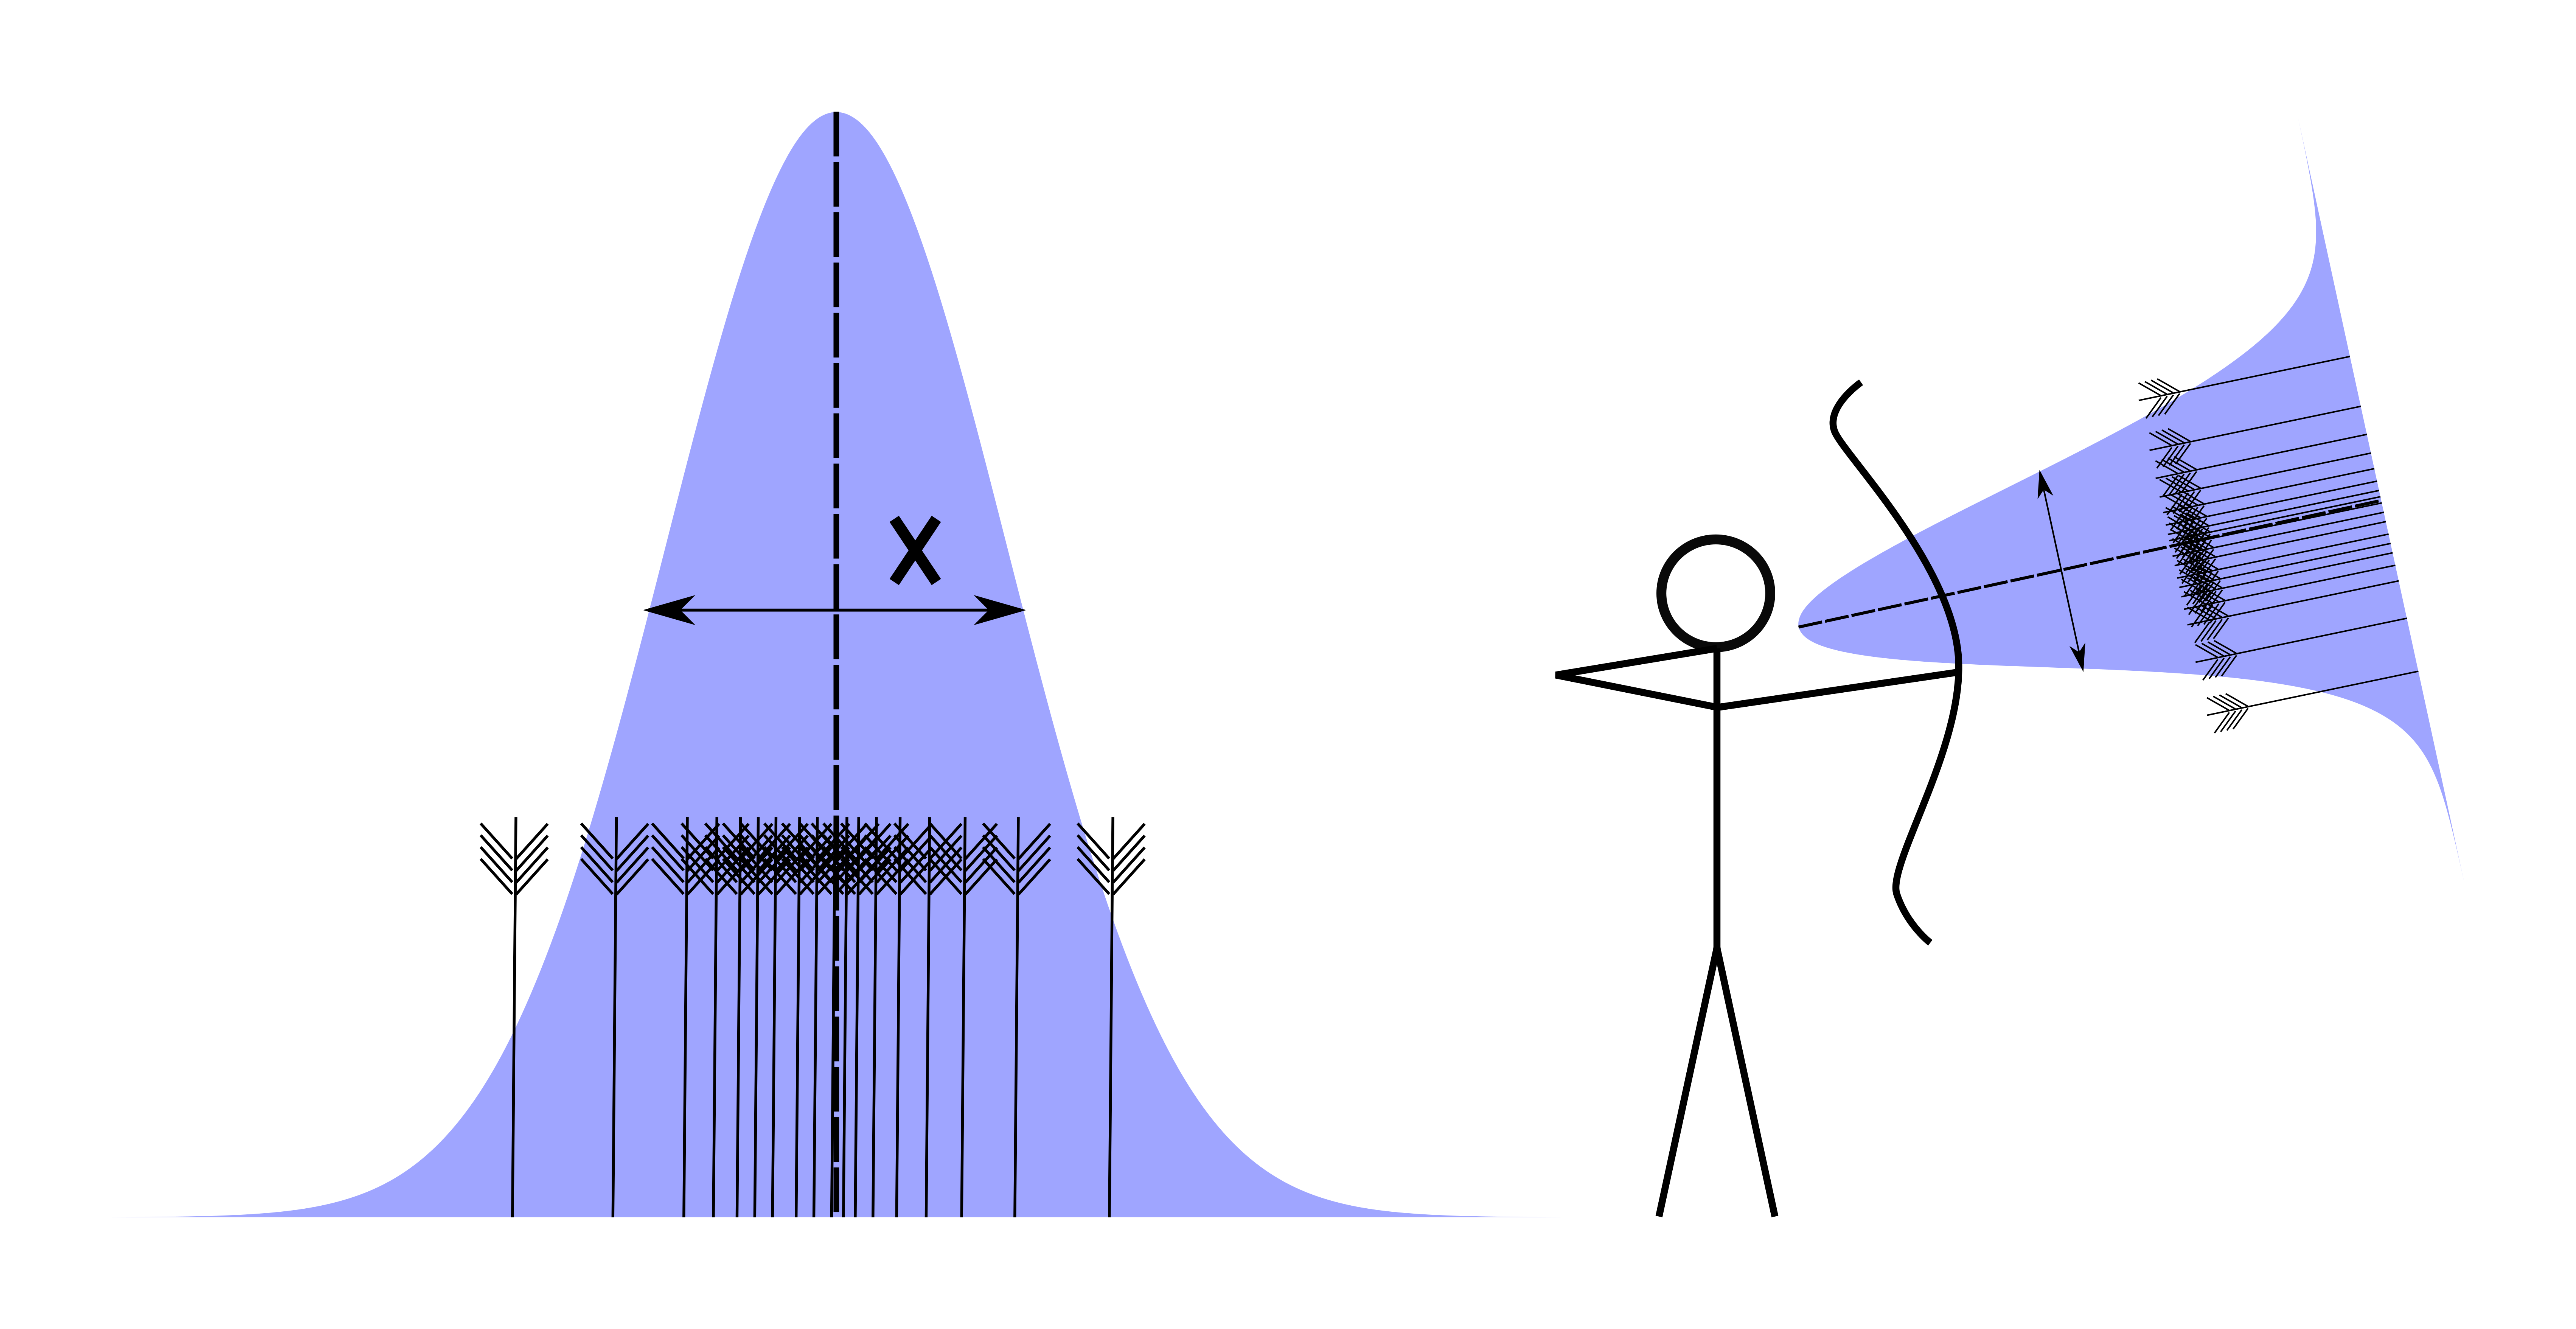 Shots described by a normal distribution.